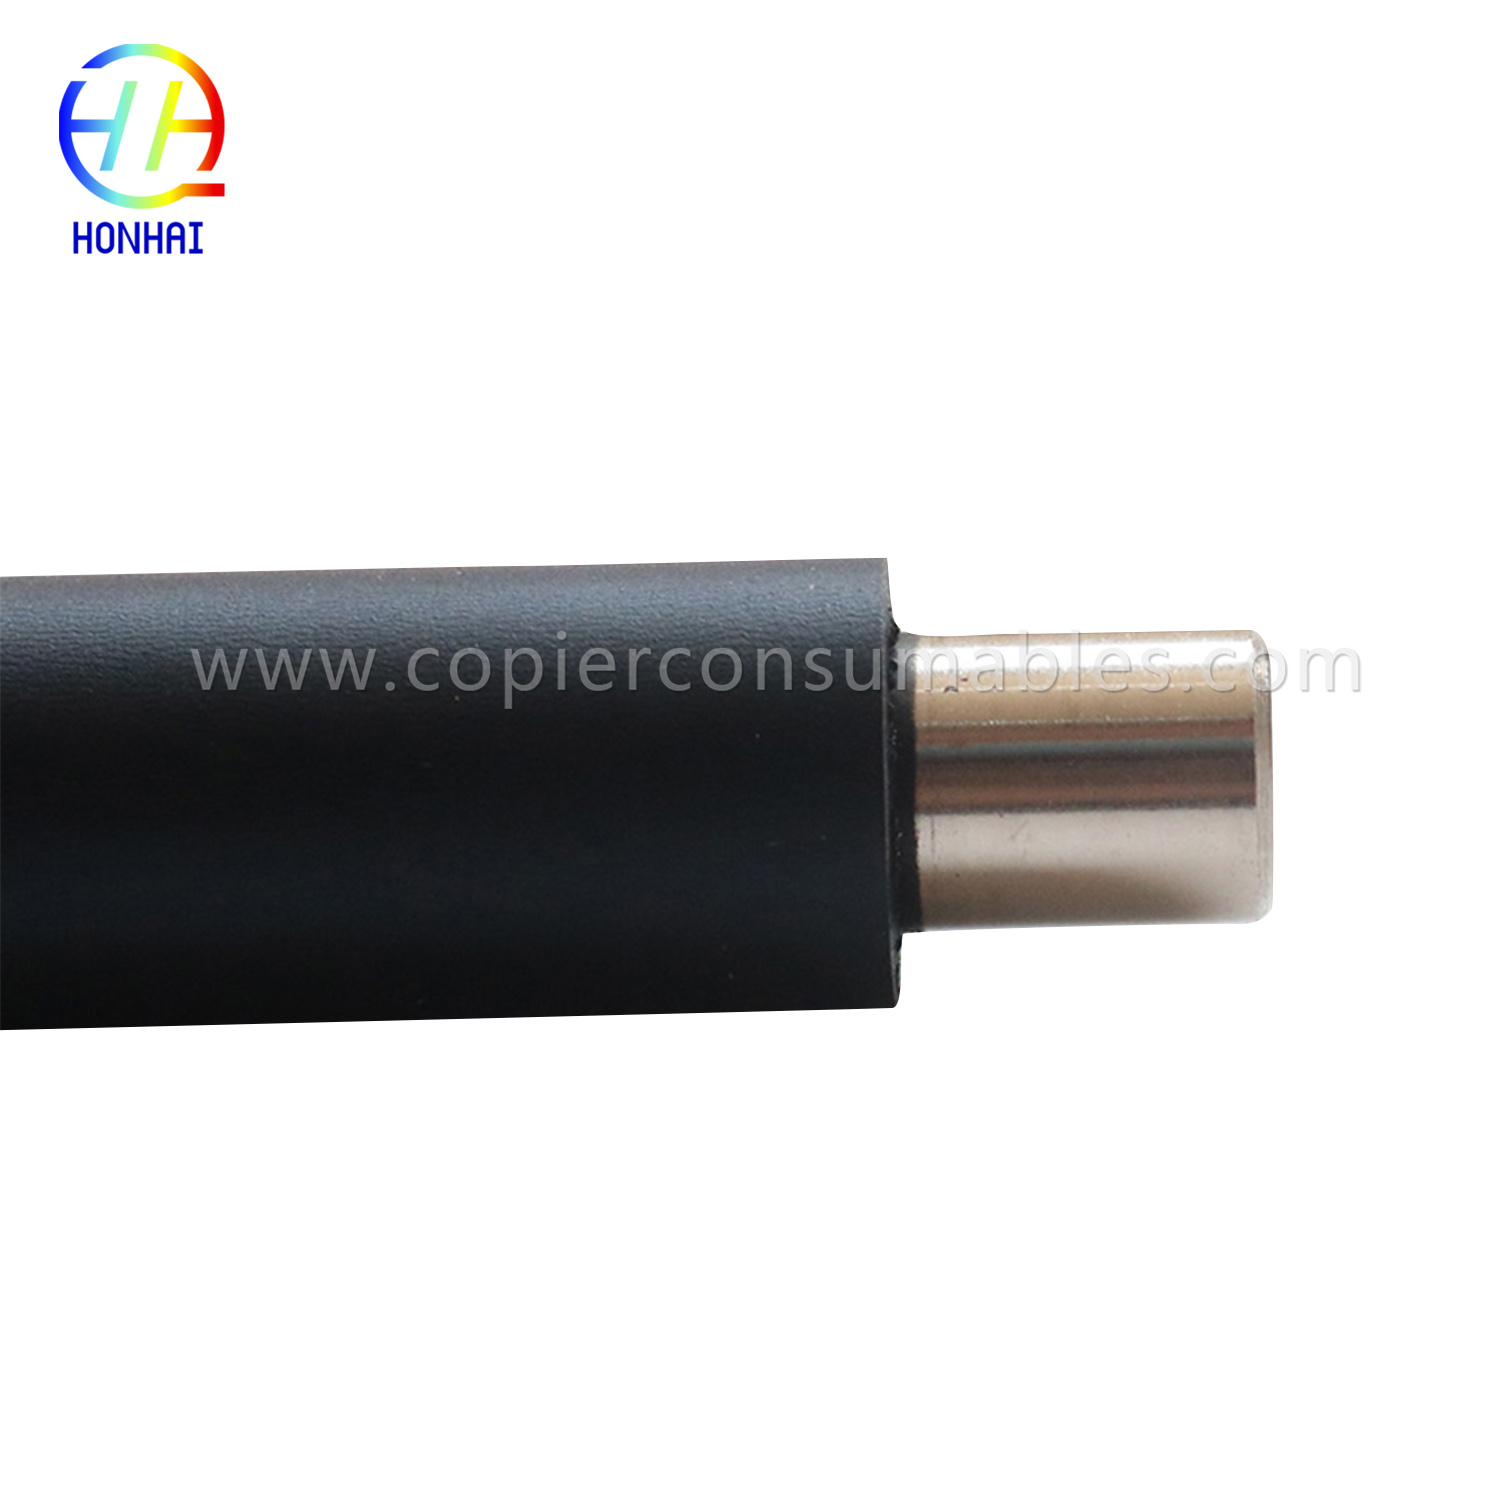 I-Primary Charge Roller ye-Xerox WorkCentre 7120 7125 7220 7225 (013R00657 013R00658 013R00659 013R00660) (2) 拷贝